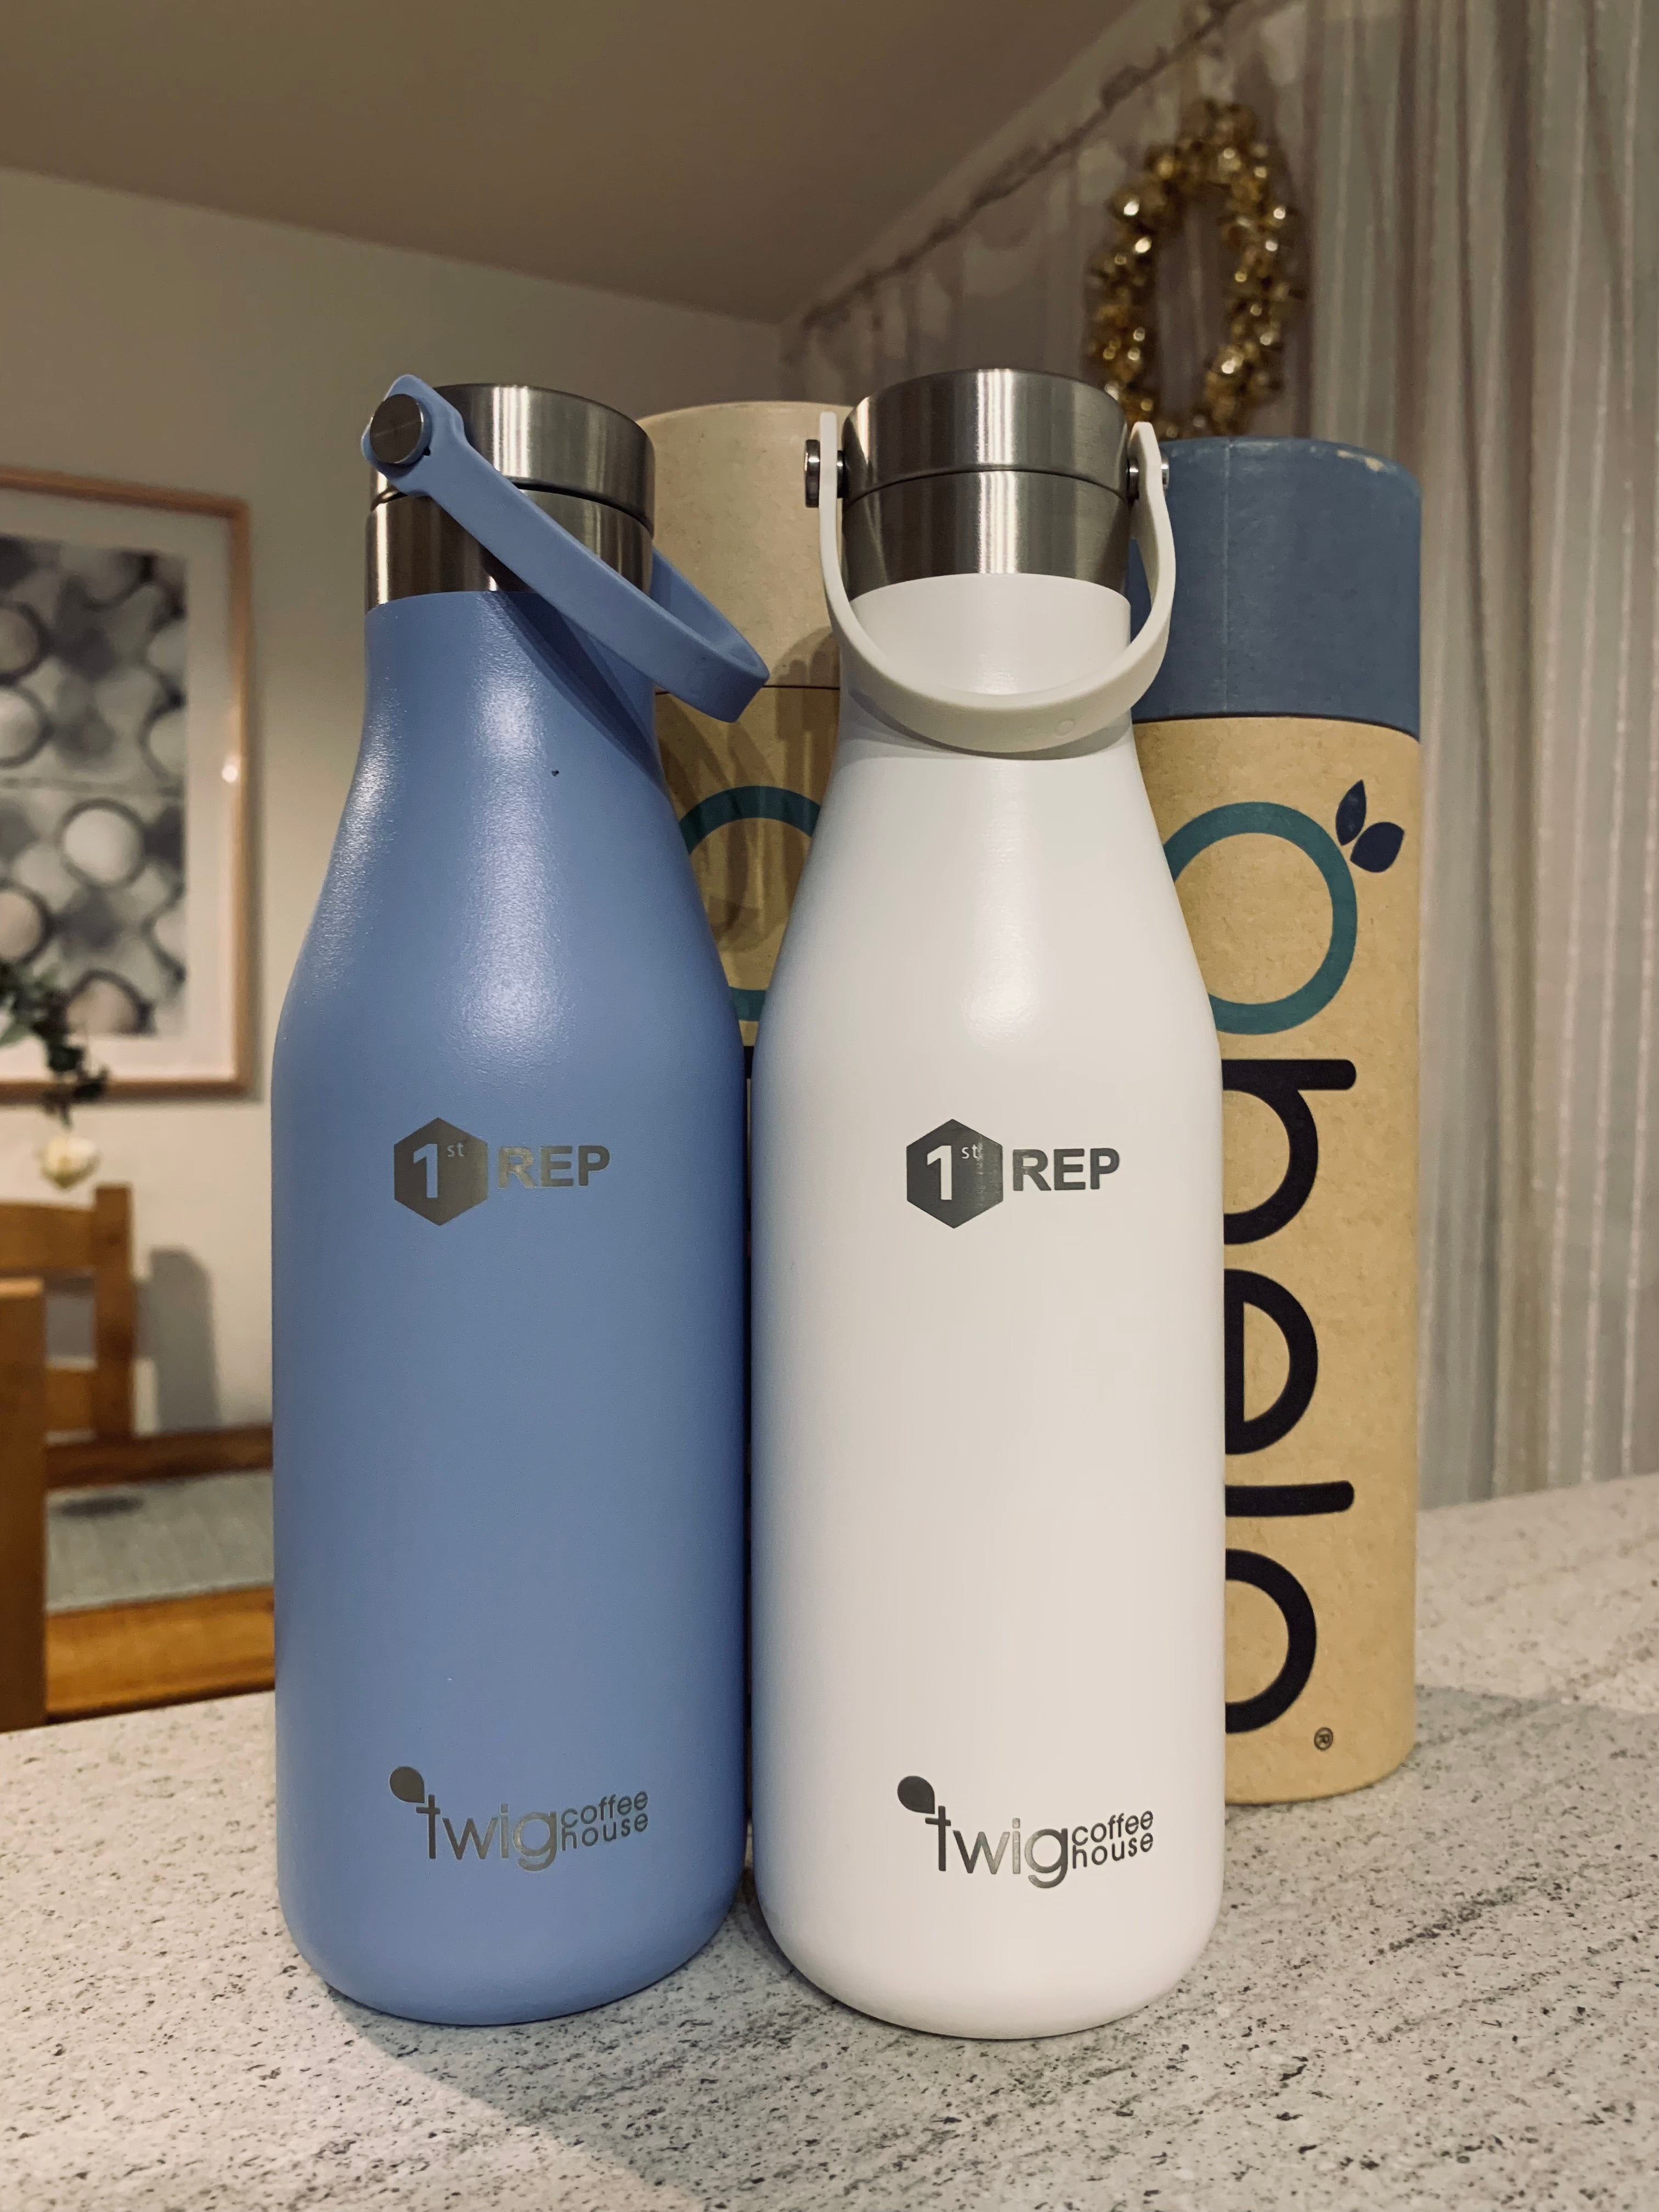 1st Rep Insulated stainless steel bottle - Twig Coffee collab